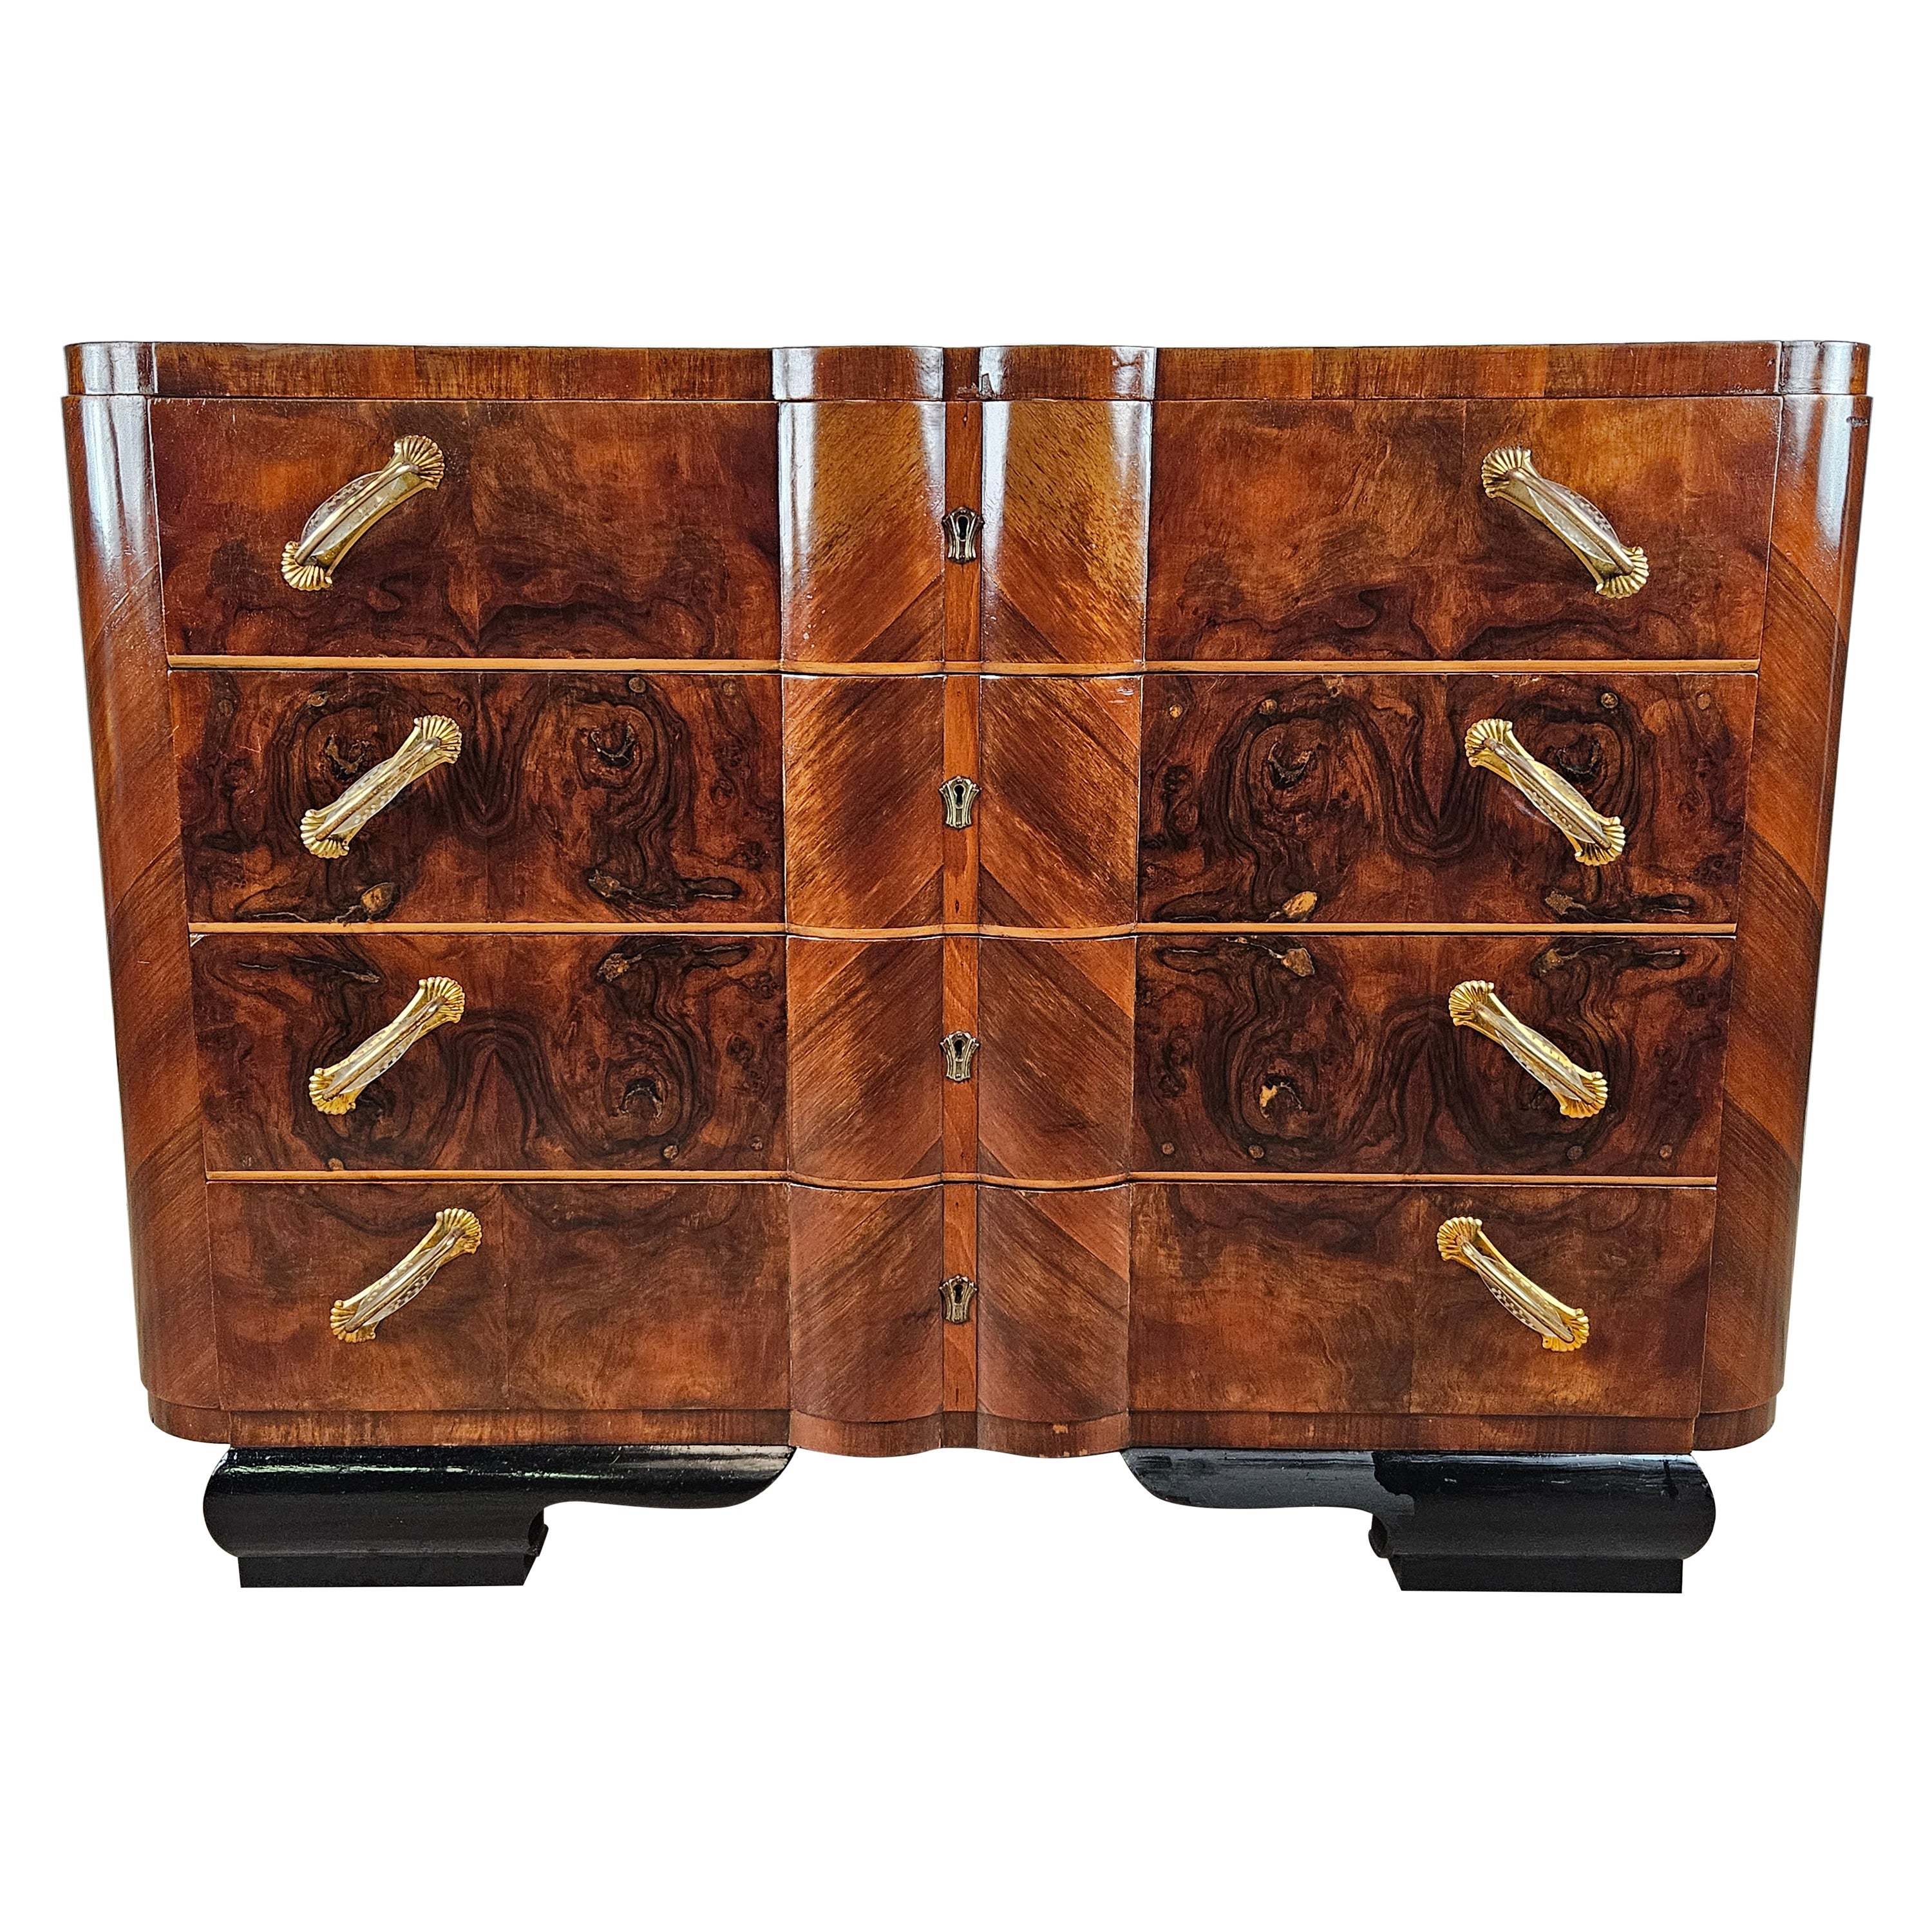 Art Deco walnut burl dresser with lacquered drawers and feet 20th century For Sale